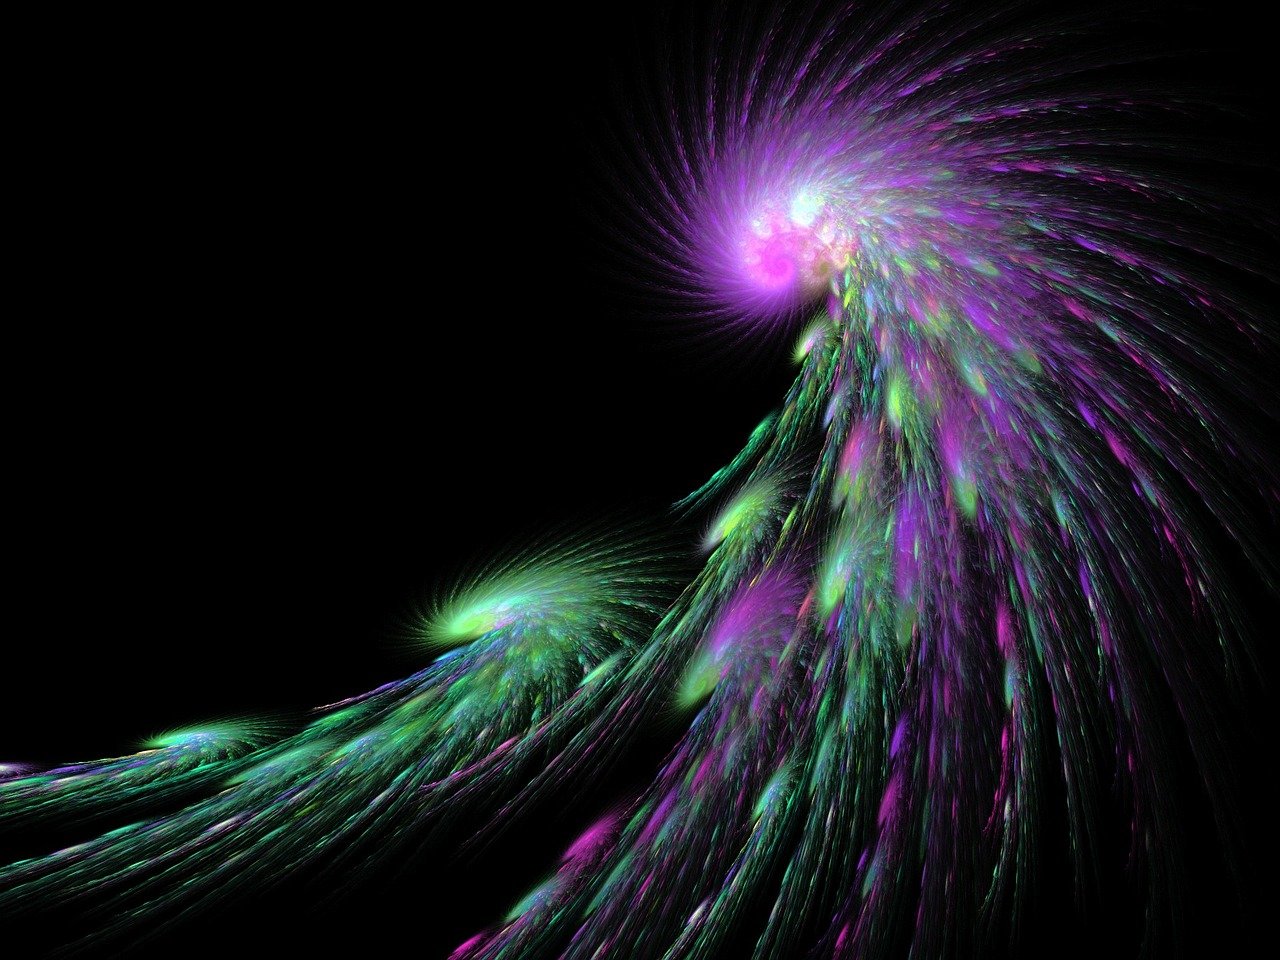 a green and purple swirl on a black background, digital art, inspired by Benoit B. Mandelbrot, flickr, glowing feathers, fireworks, 3d fractal background, wisps of energy in the air